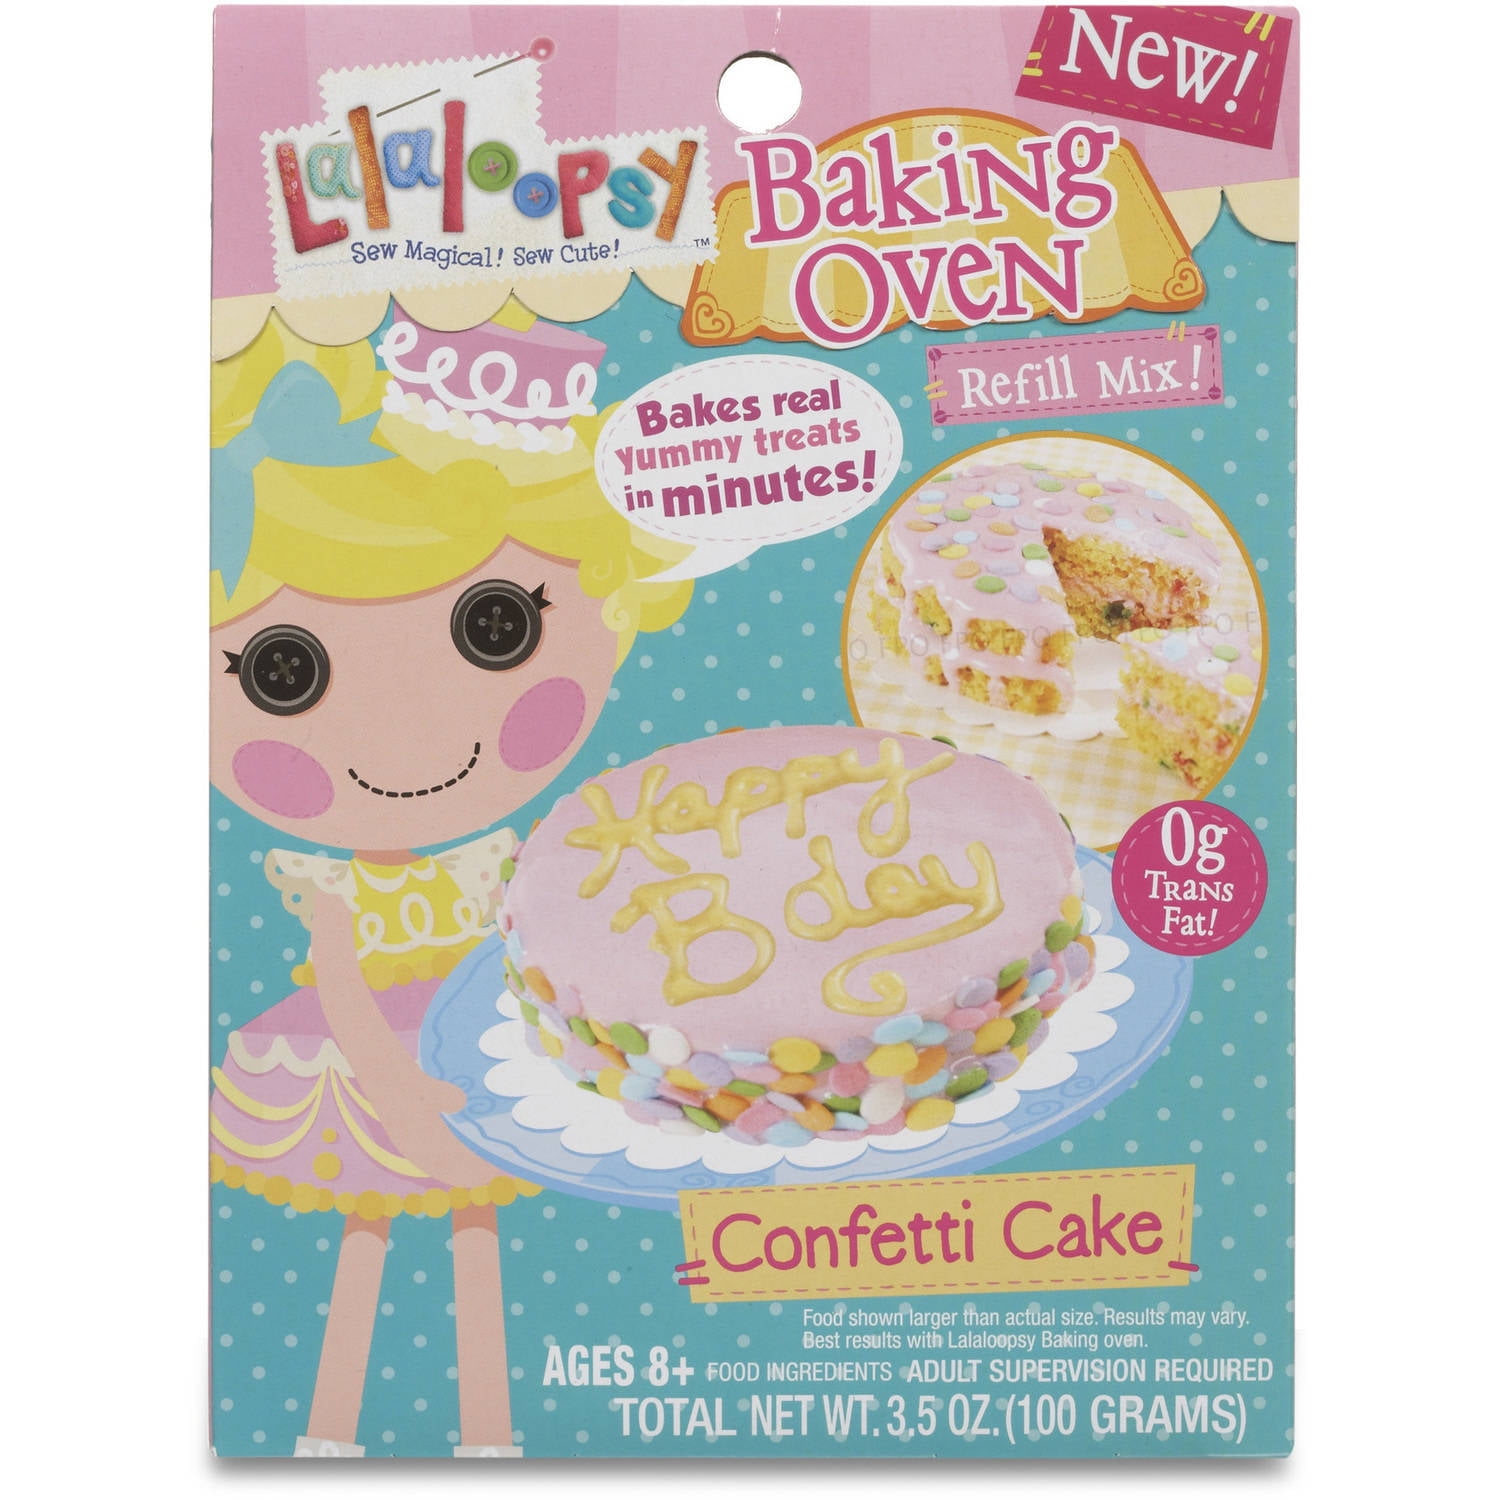 Lalaloopsy Baking Oven Mix Confetti Cake with Hot Pink Frosting